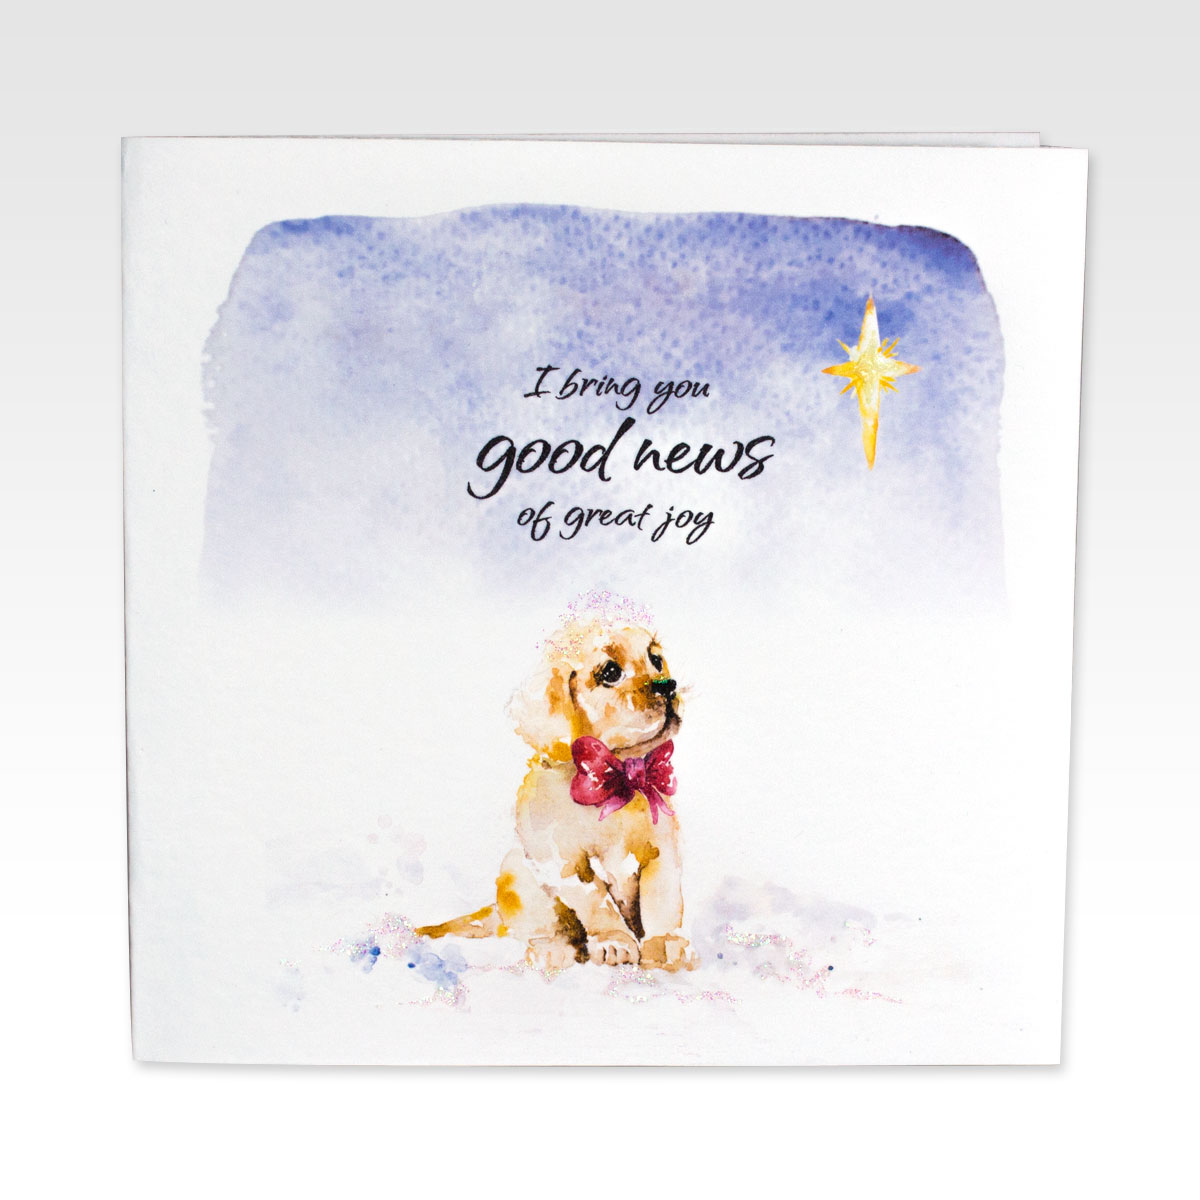 Christmas card with image of a puppy looking up at the Christmas Star.